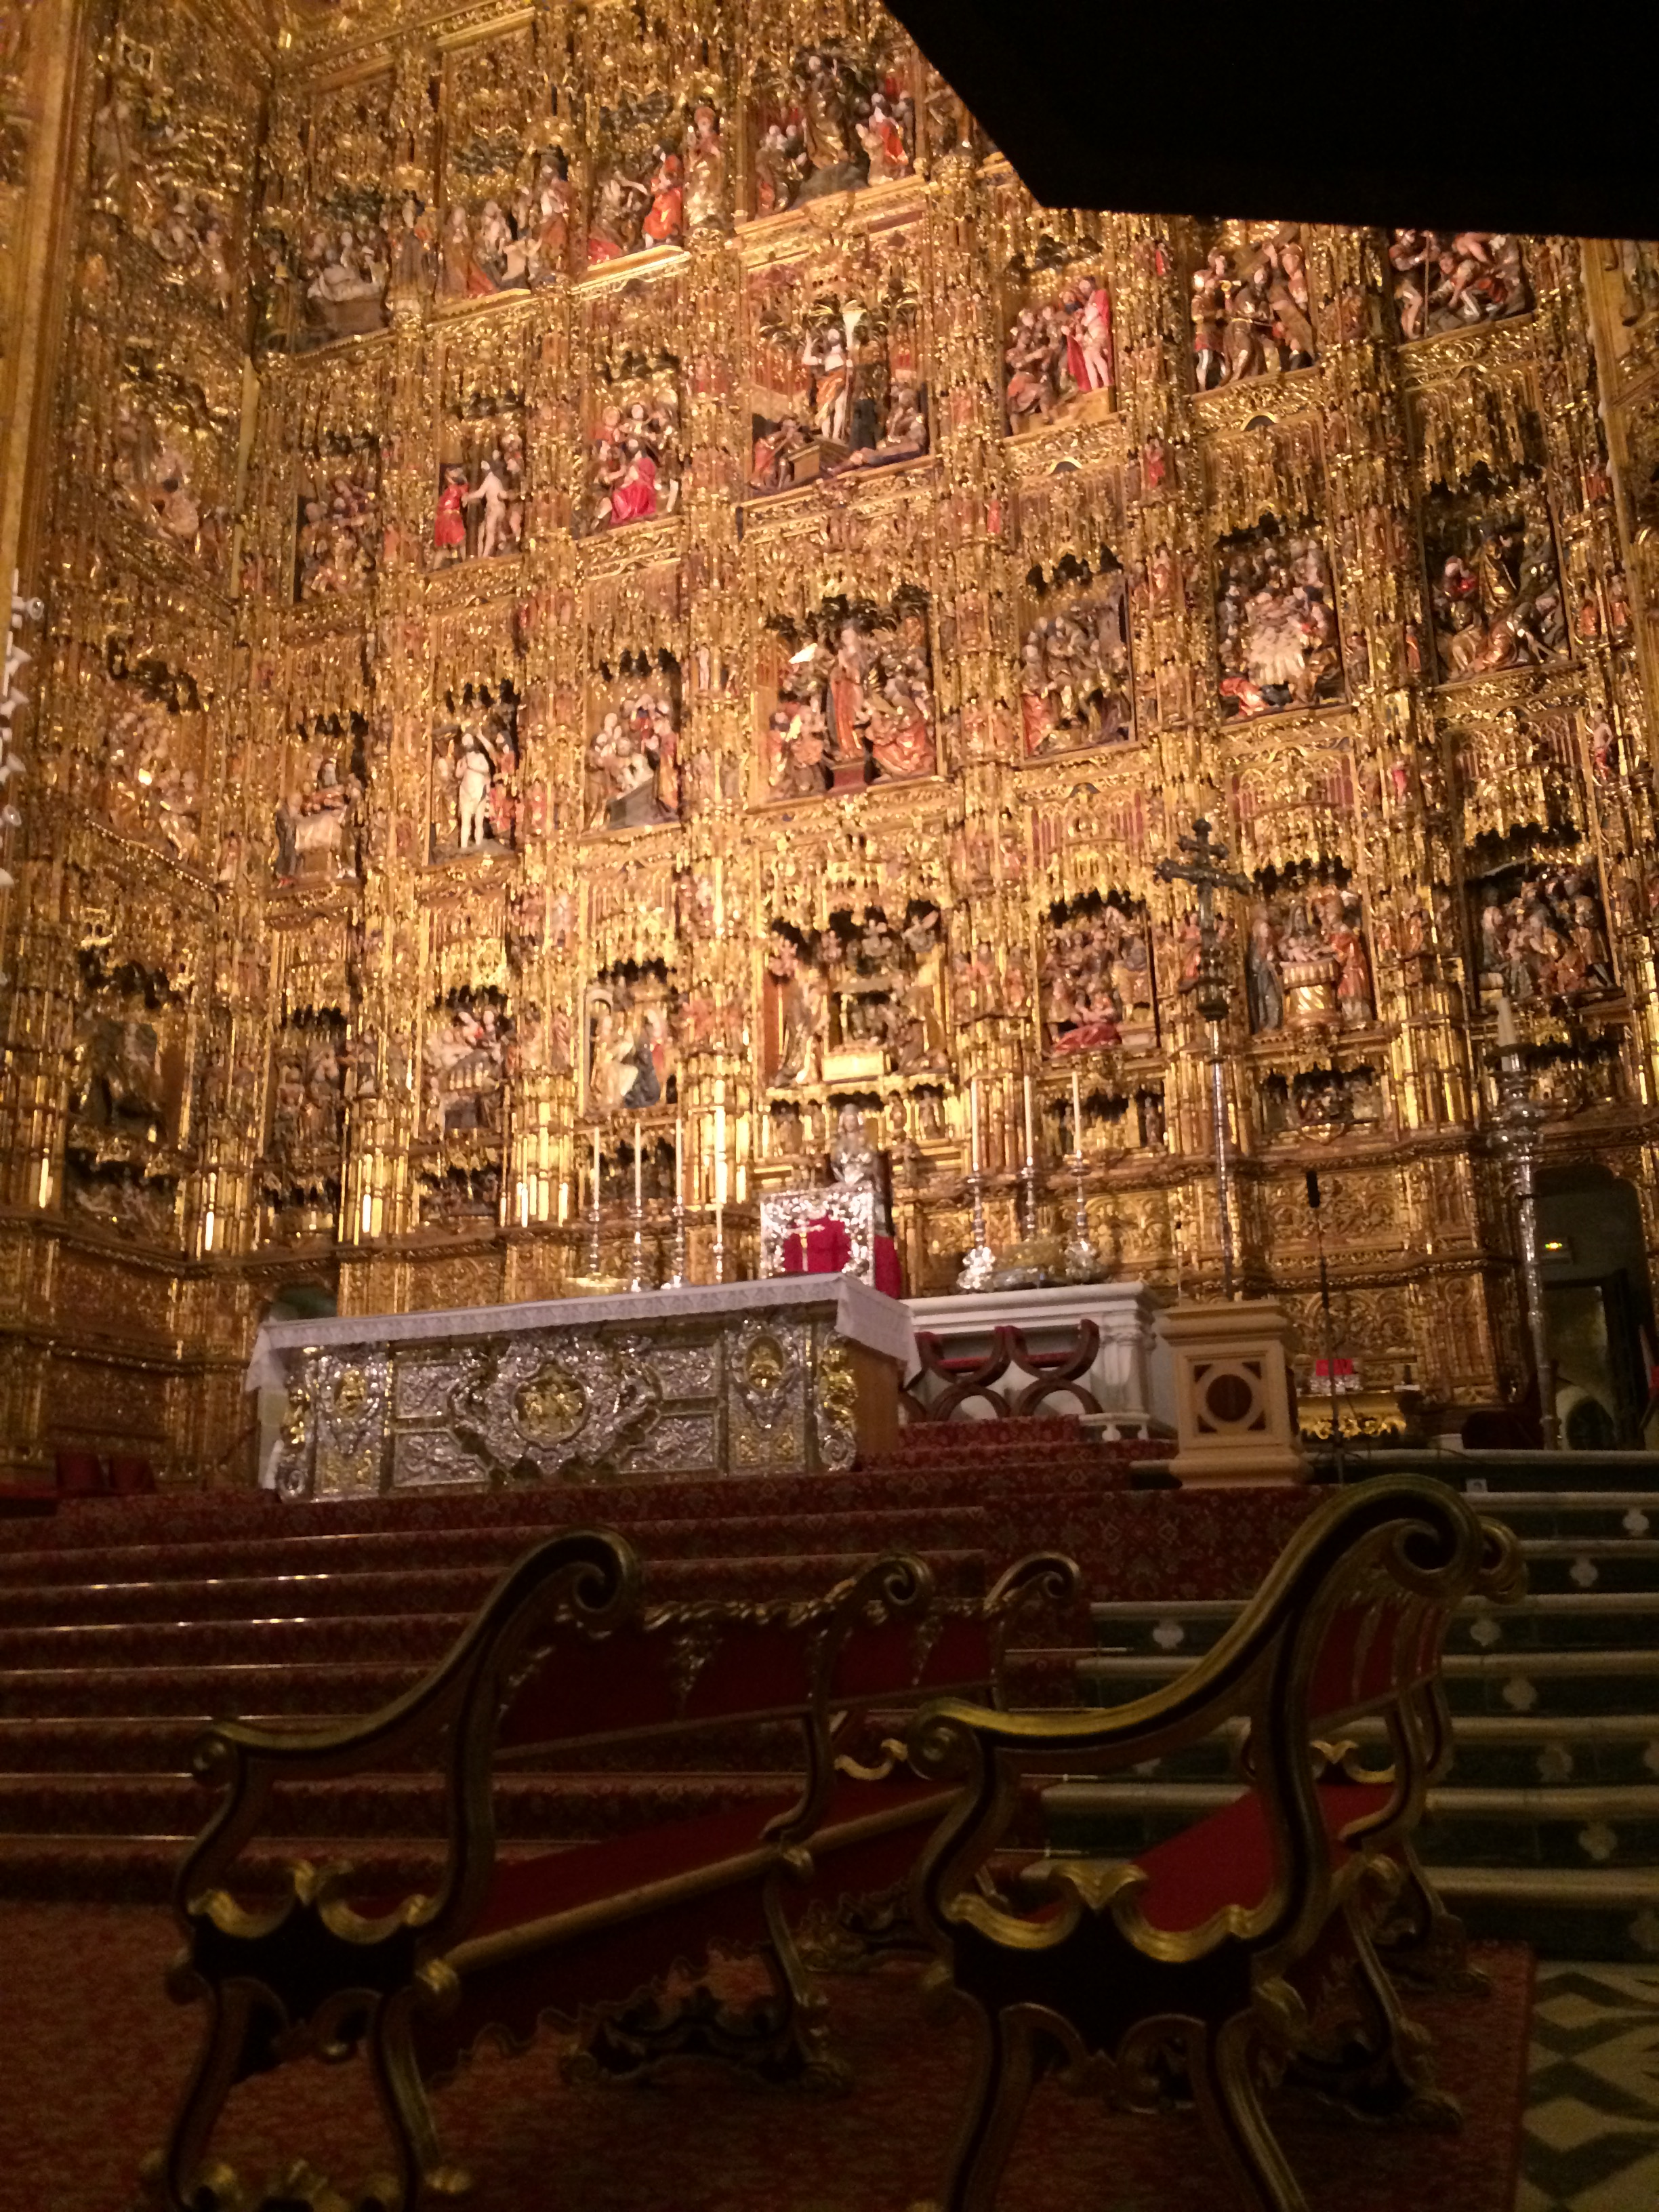 Image of the alter inside the Seville Cathedral